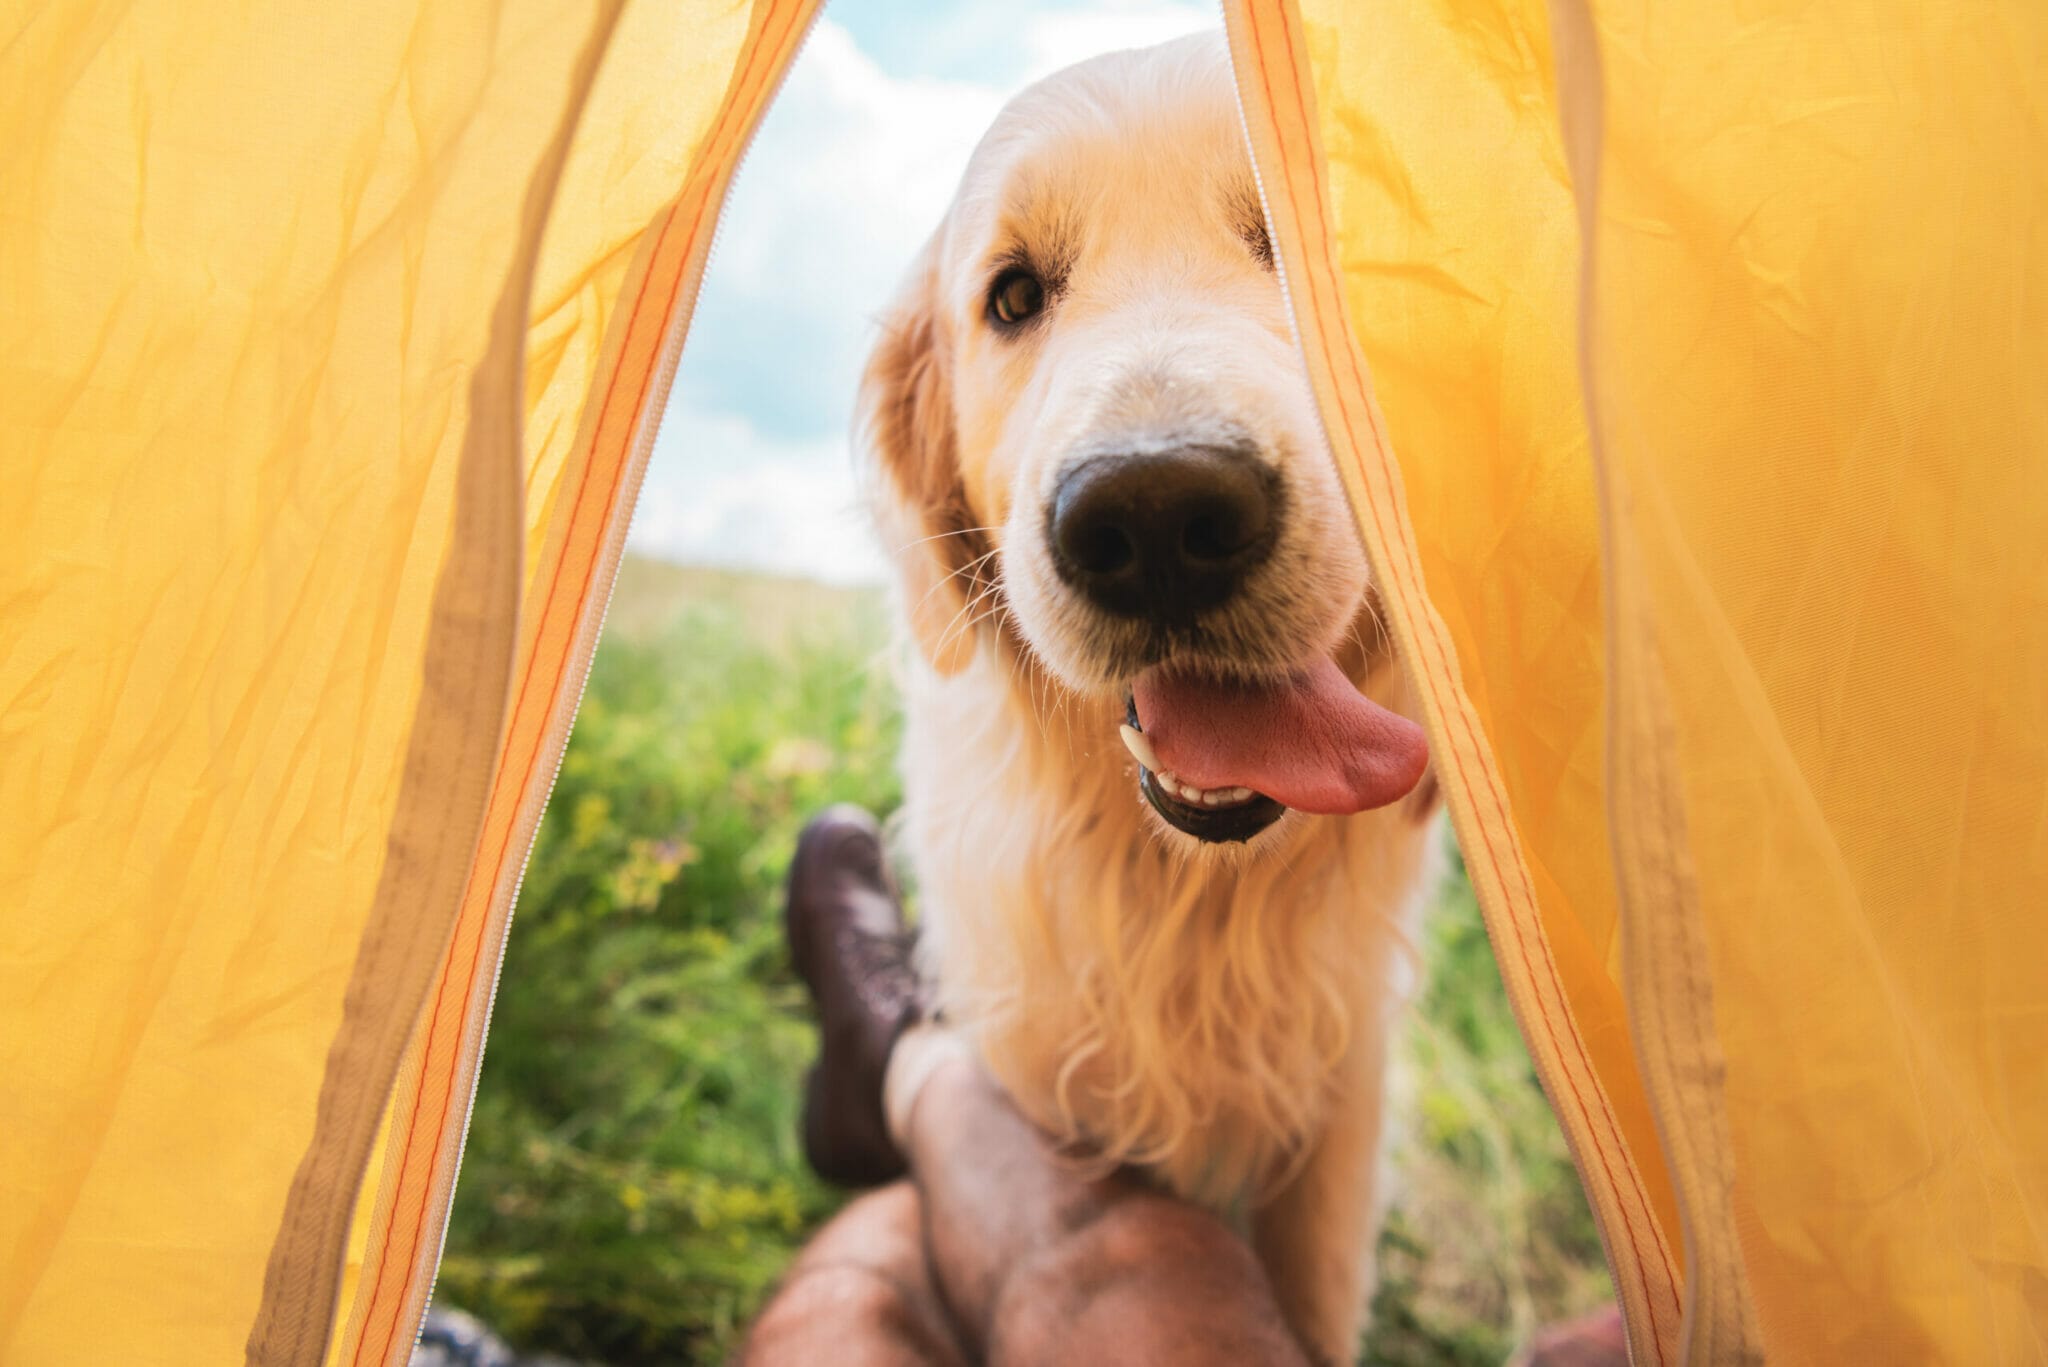 Best dog sleeping bags for backpacking